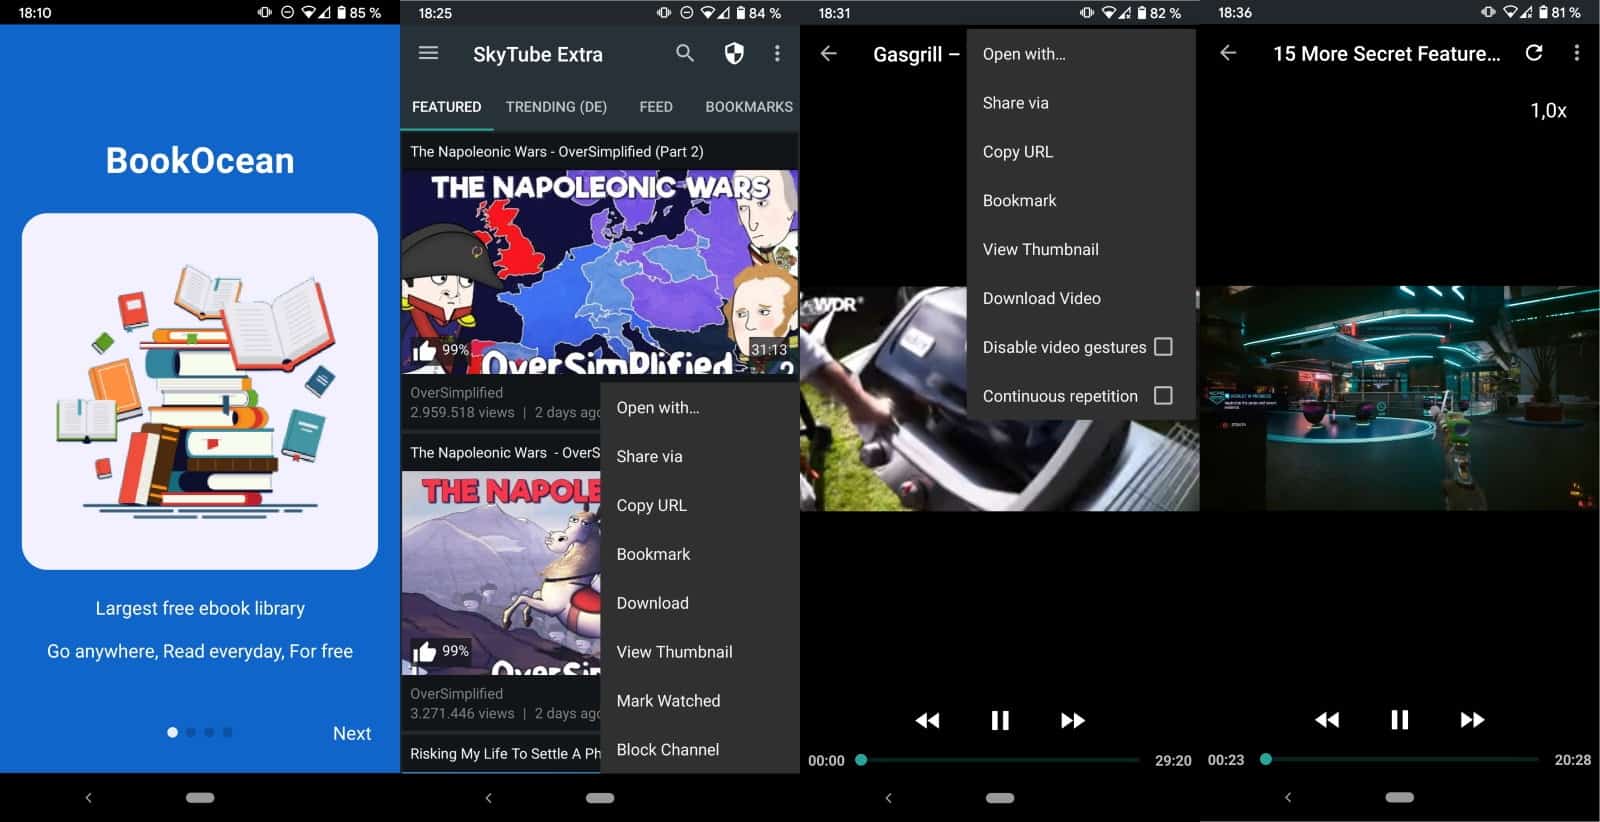 skytube youtube app android open source